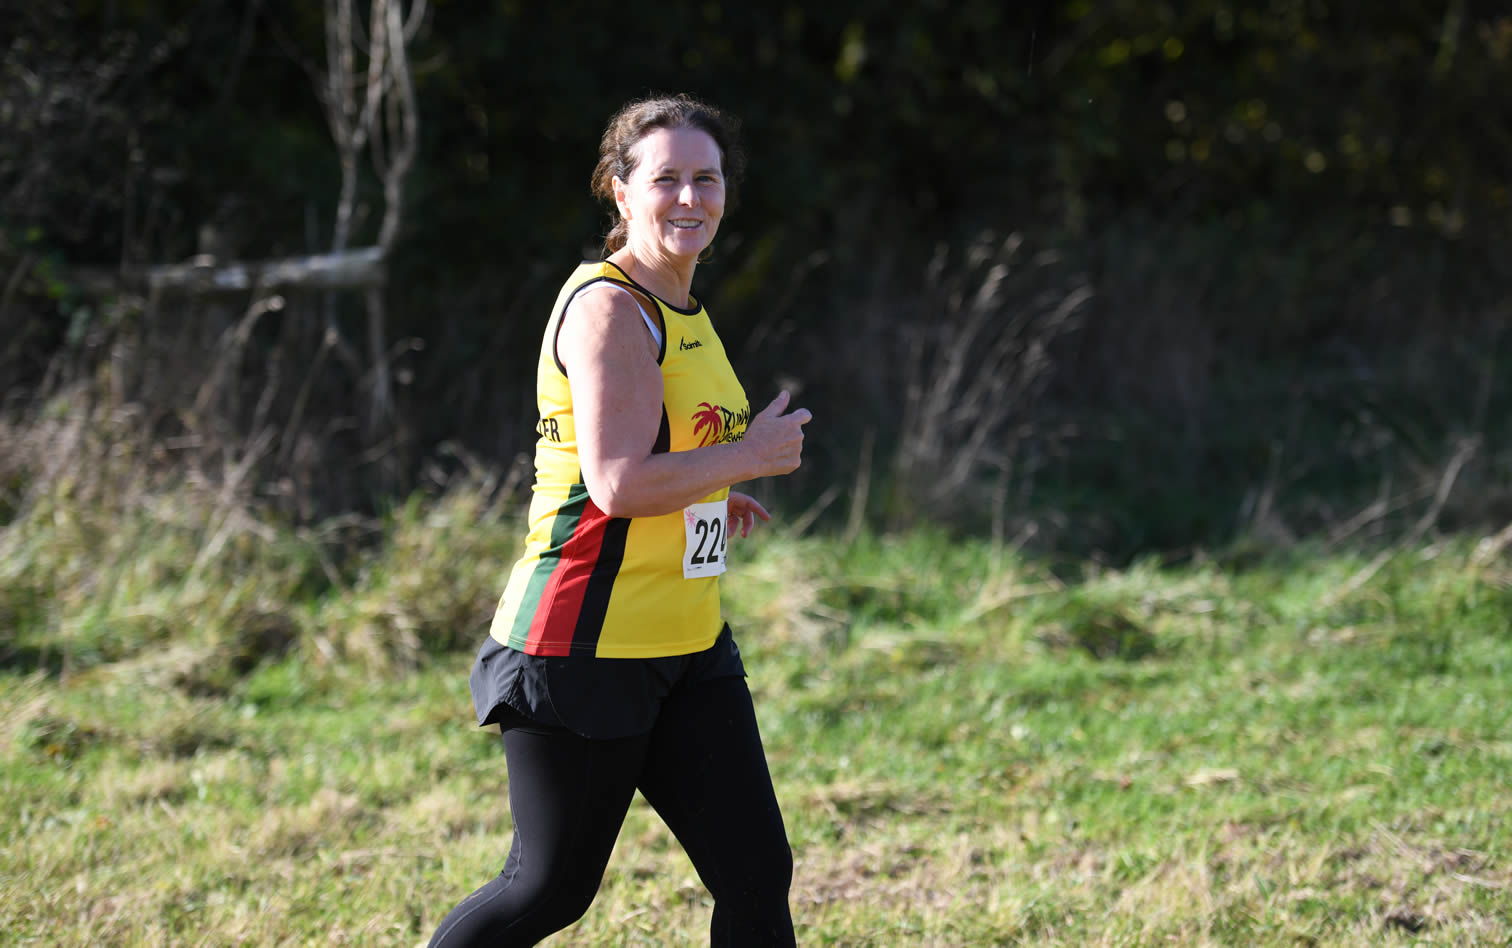 Linda Edwards at Gloucestershire AAA Cross Country League, Cirencester Park - 30th October 2021